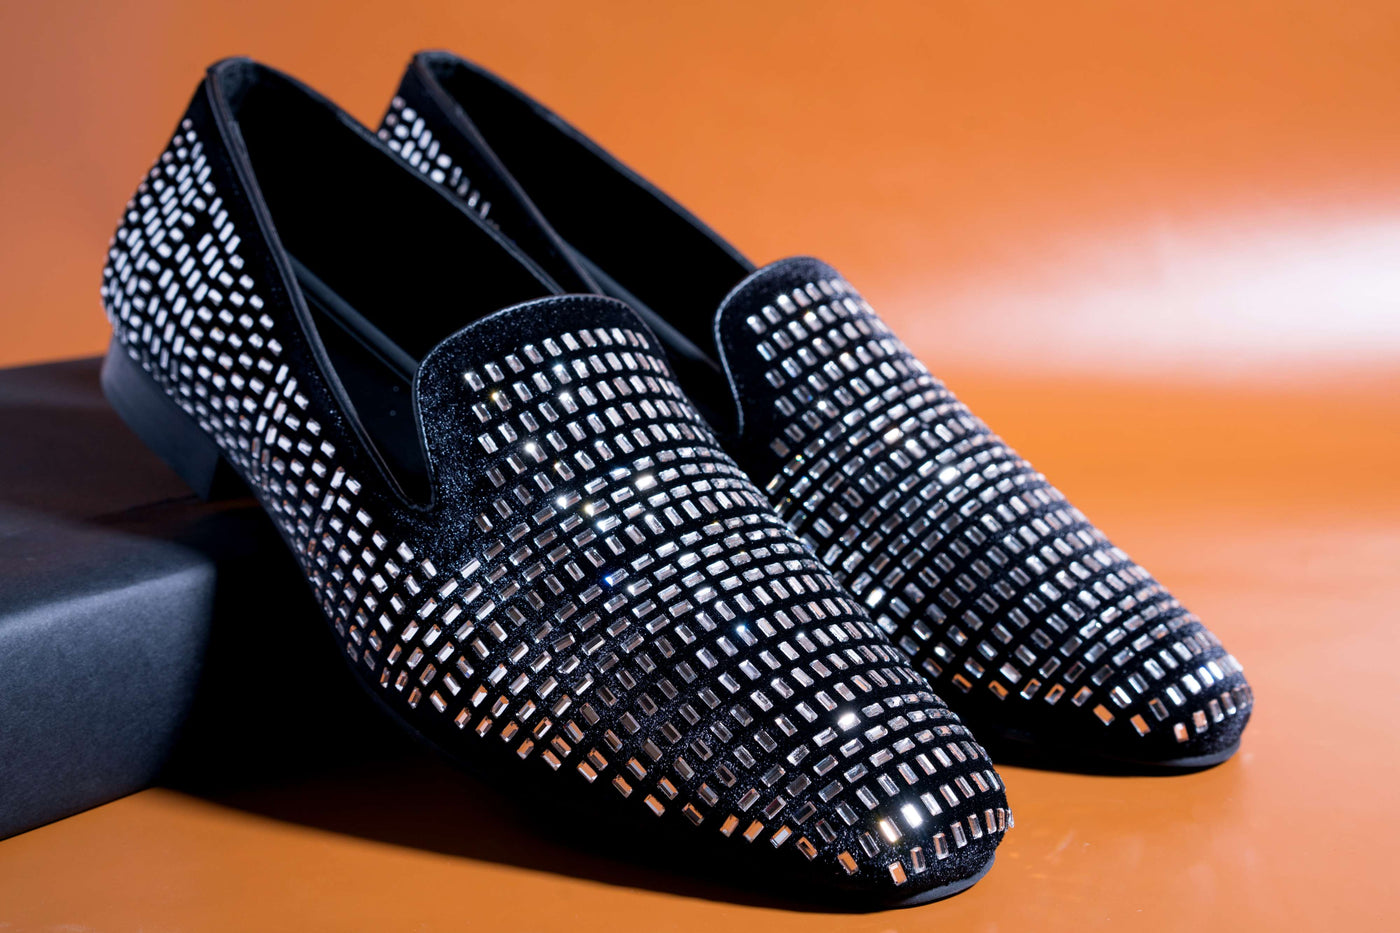 Stylish Men's Fashion Wedding Imported Studded Silver Moccasins High Quality Slip On Flat Loafer-Unique and Classy